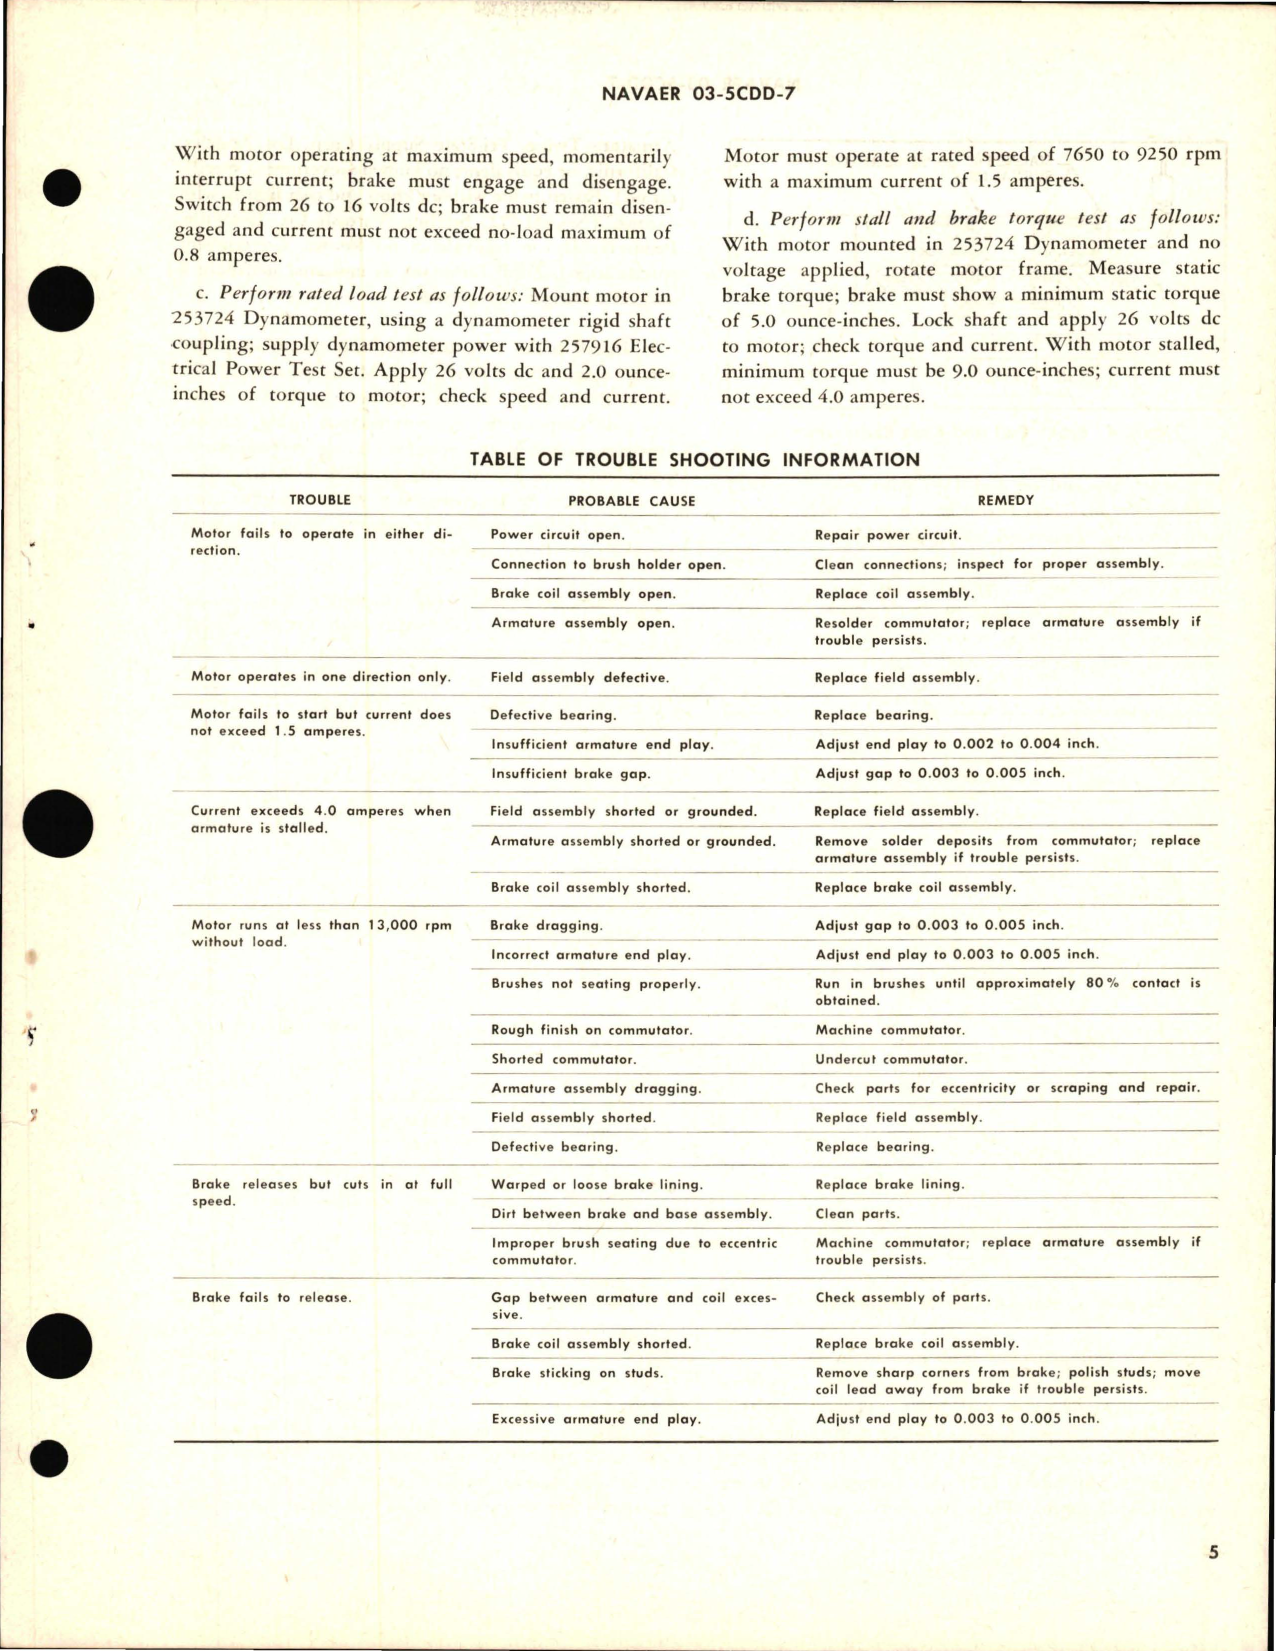 Sample page 5 from AirCorps Library document: Overhaul Instructions with Parts Breakdown for Aircraft Direct-Current Motor - Part 32746 Model DCM15-117-1